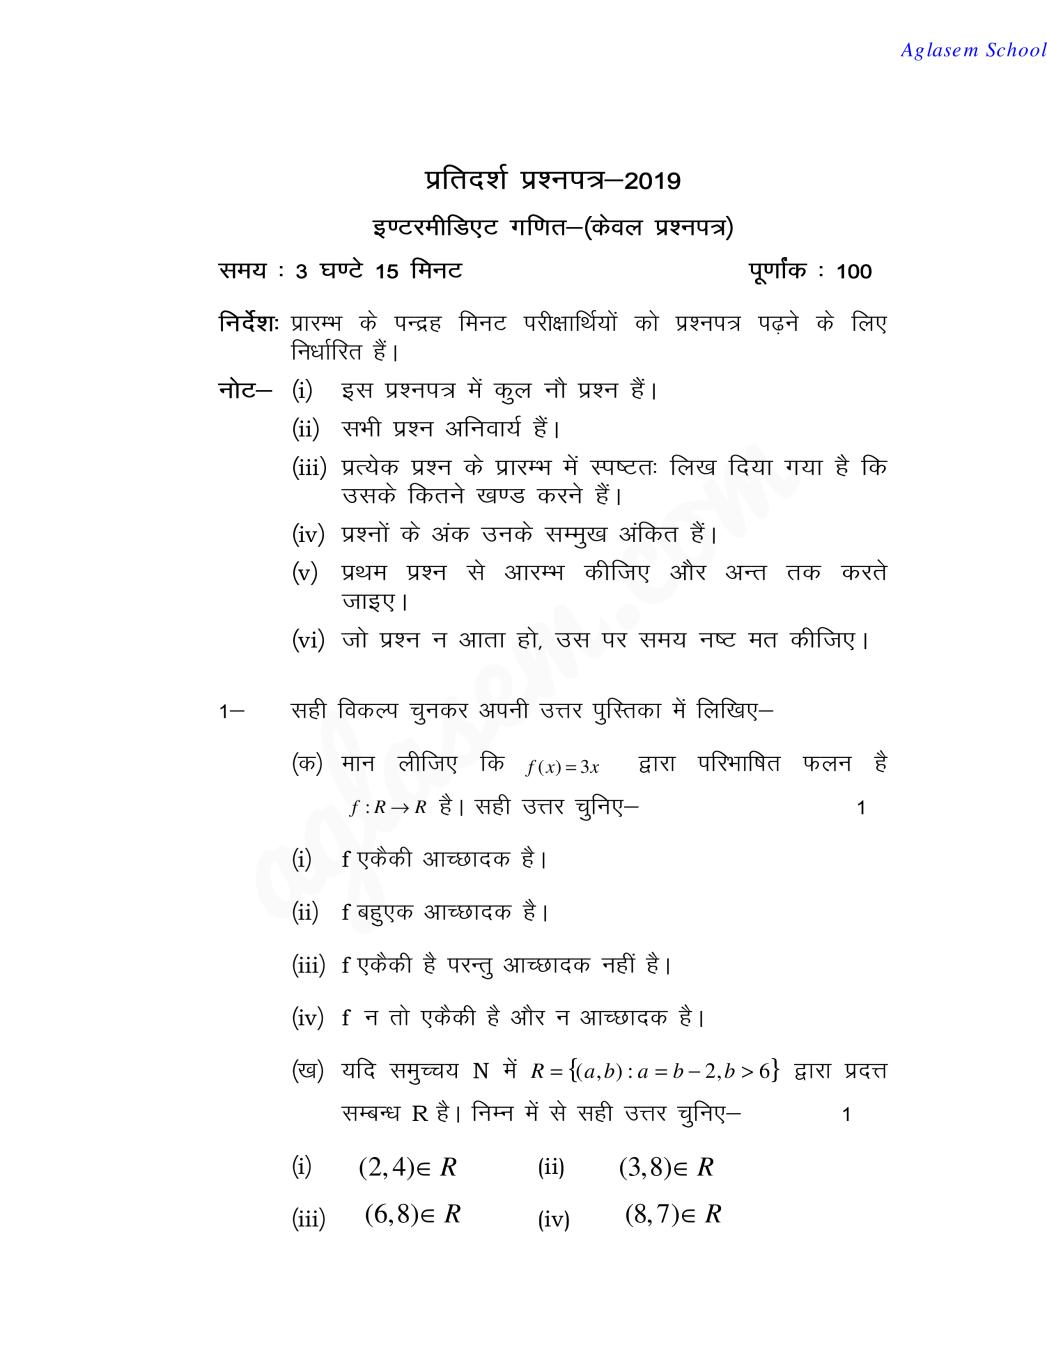 UP Board Class 12 Model Paper 2019 MATHS - Page 1